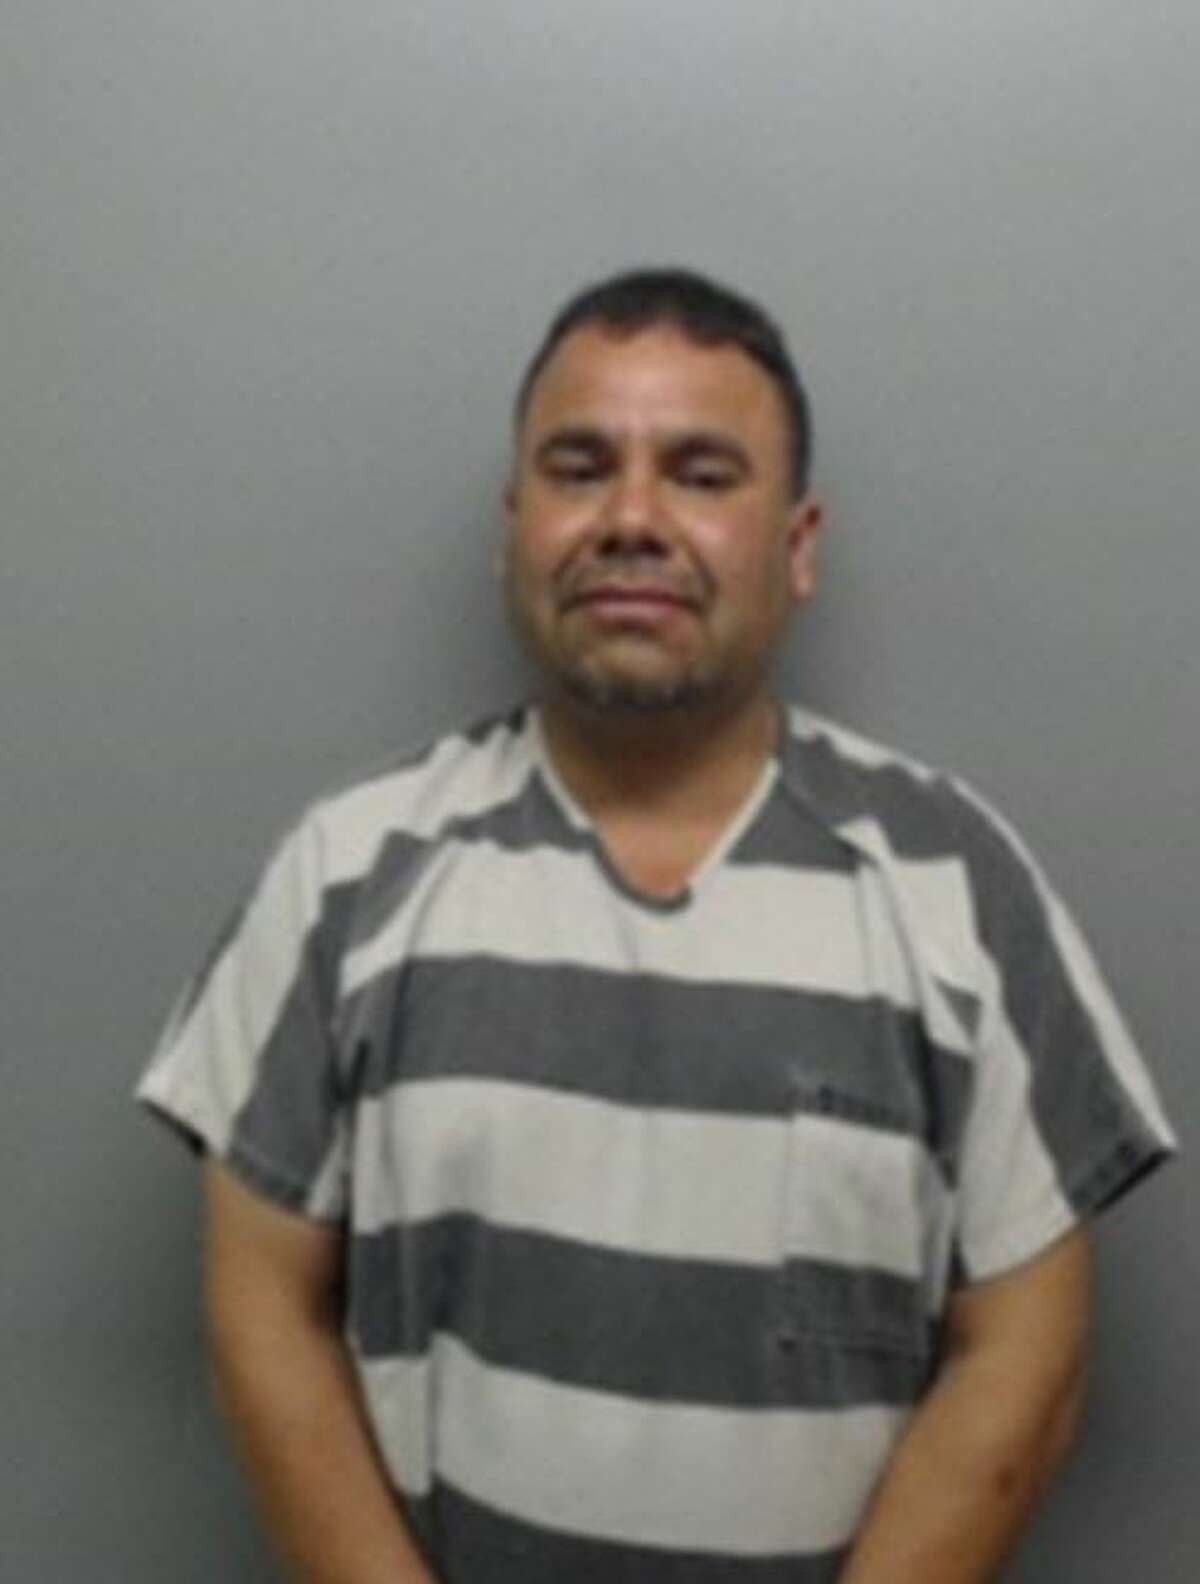 Mario Alberto Raz, 41, was charged with felony possession of marijuana. He was released on bond the next day.